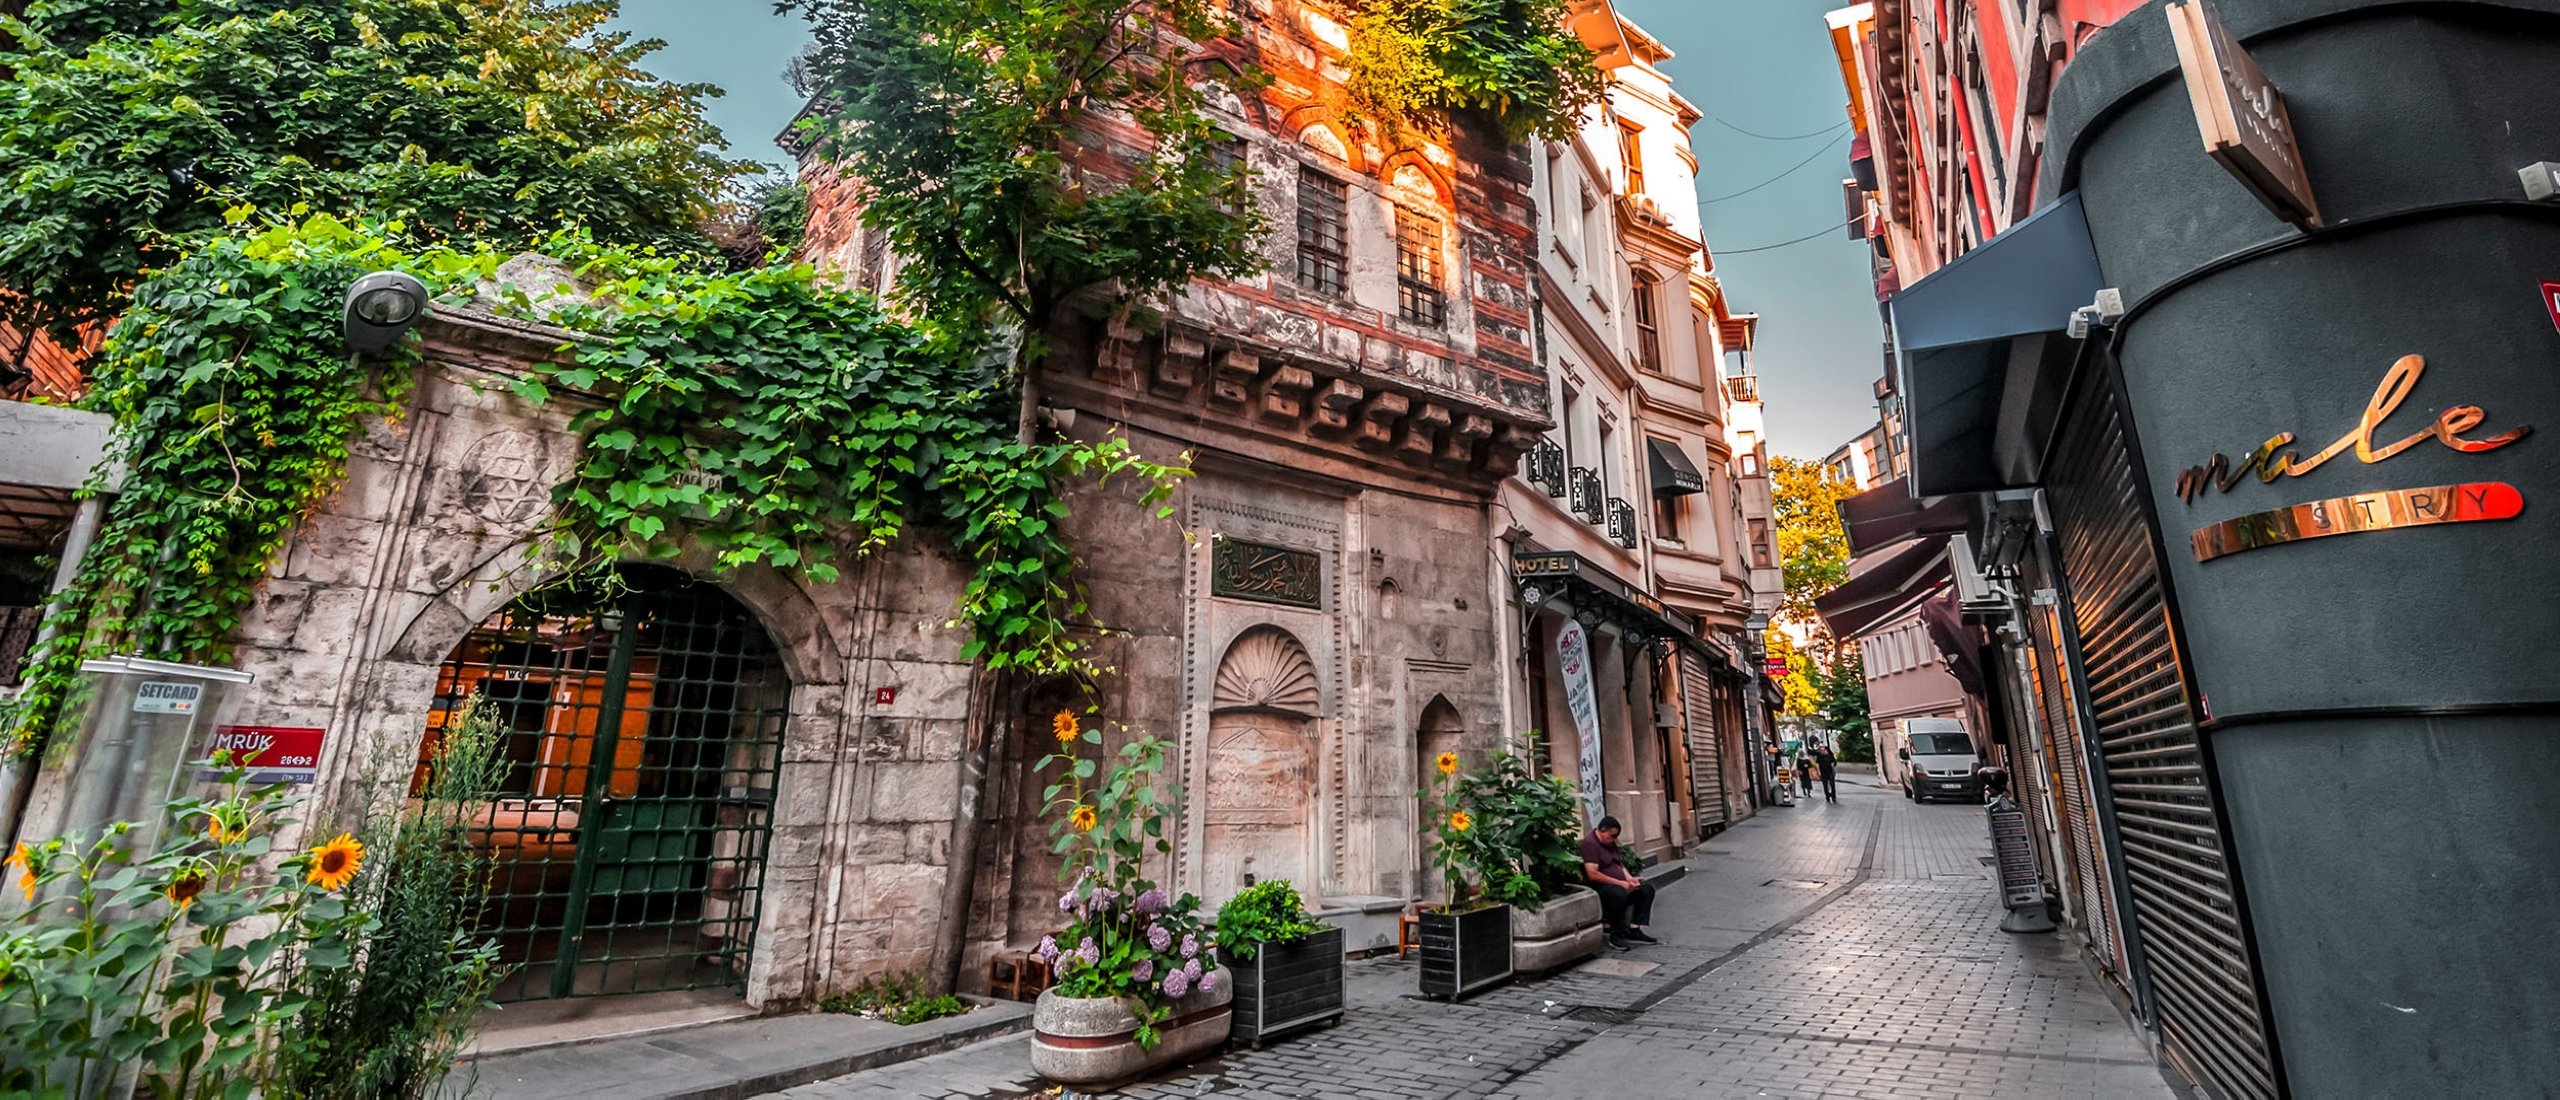 off the beaten path a morning in historical karakoy daily sabah